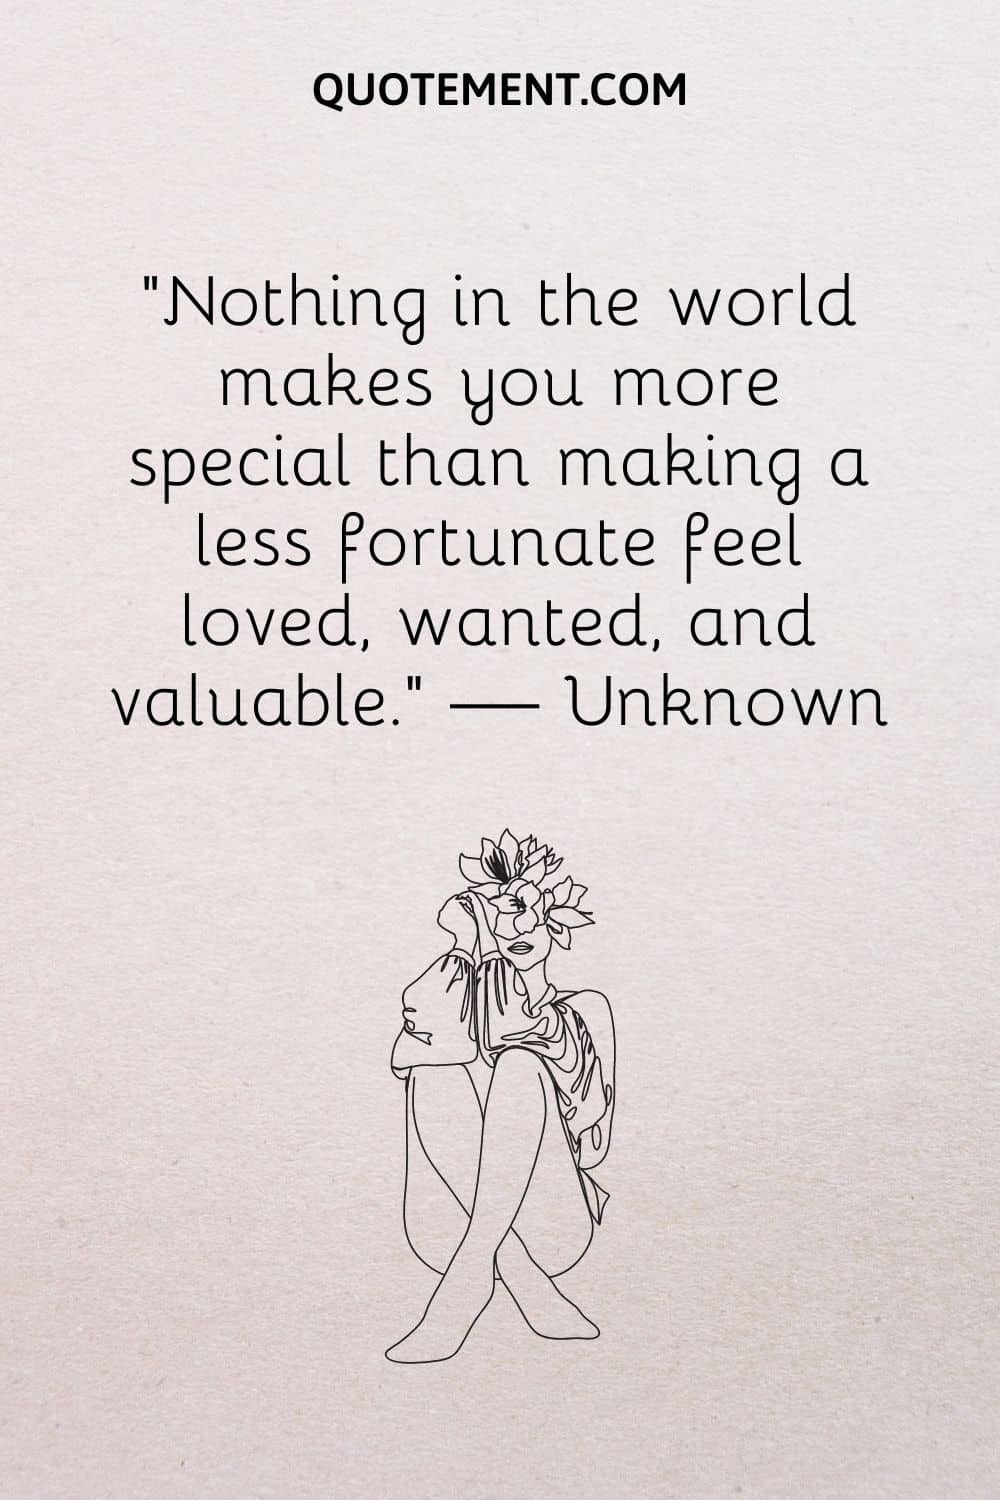 Nothing in the world makes you more special than making a less fortunate feel loved